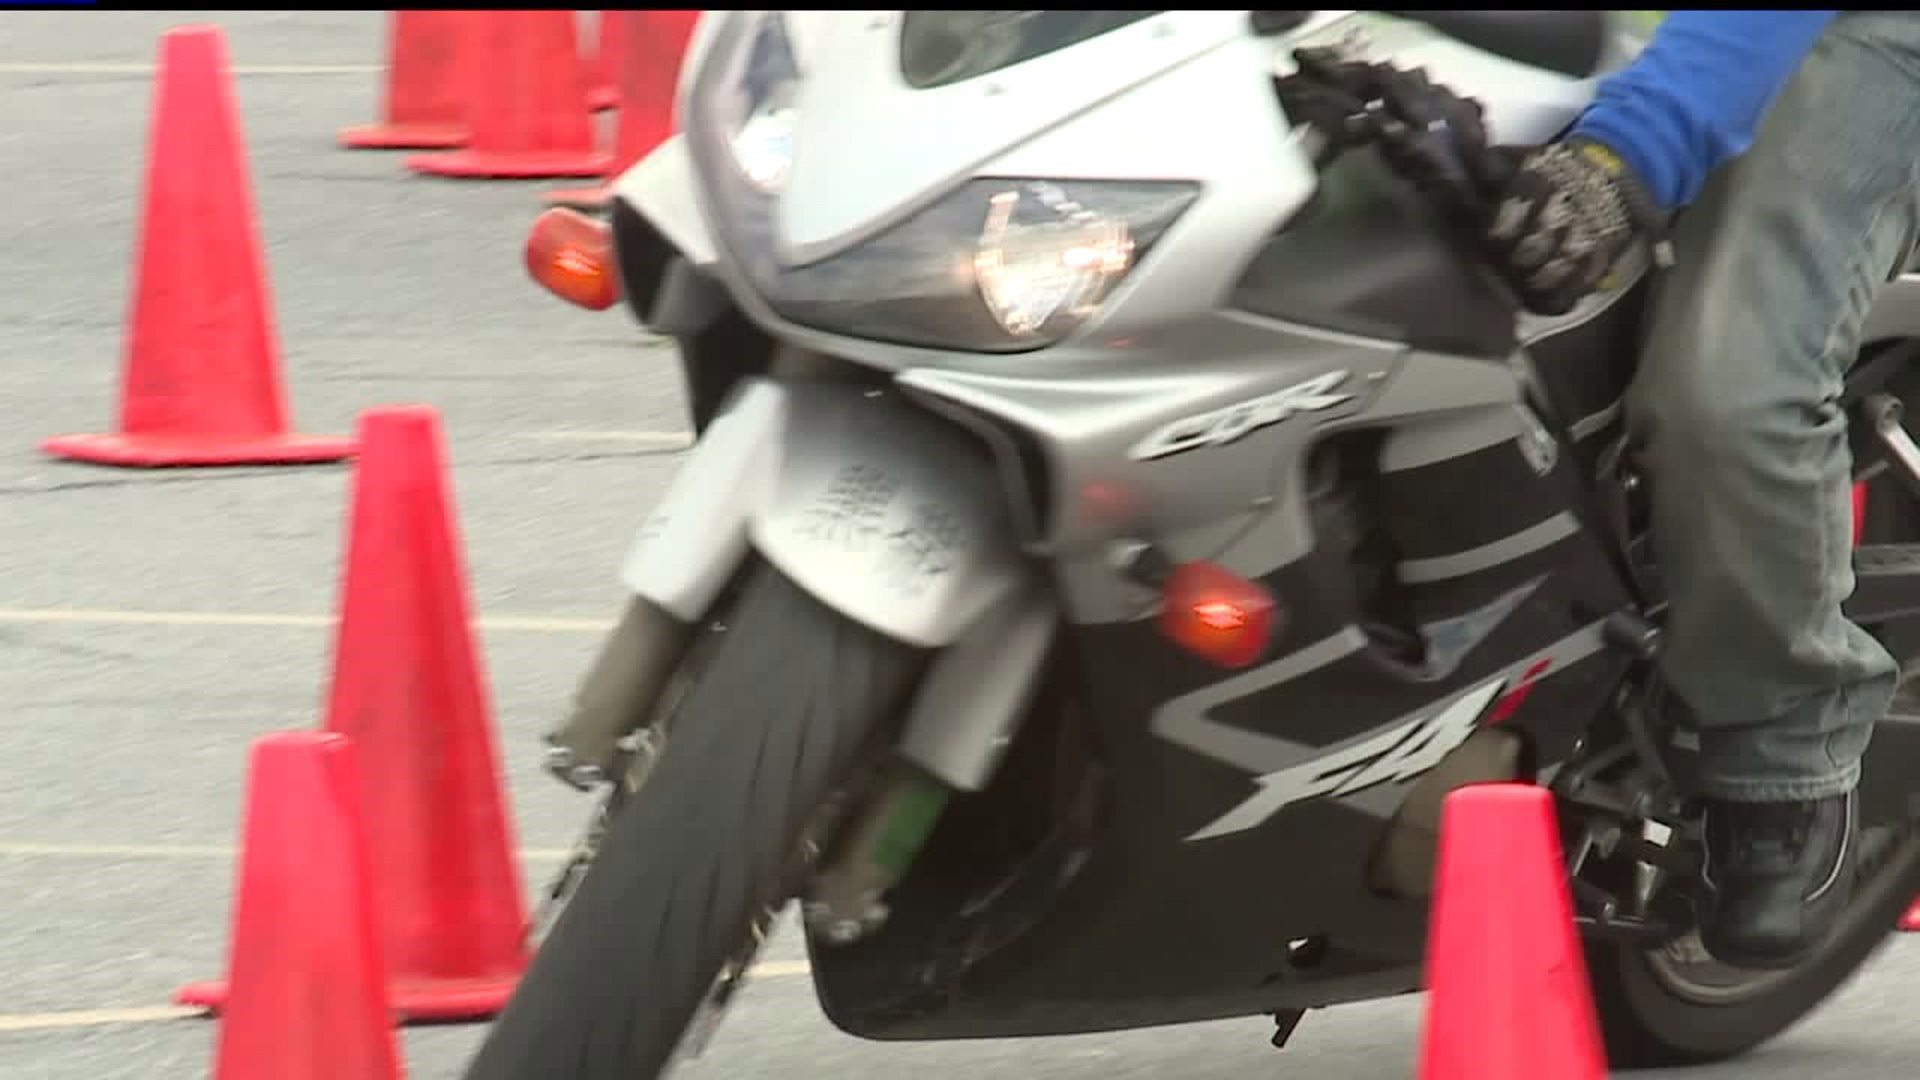 "Live Free, Ride Alive" Safety Day held for motorcyclists at Farm Show Complex